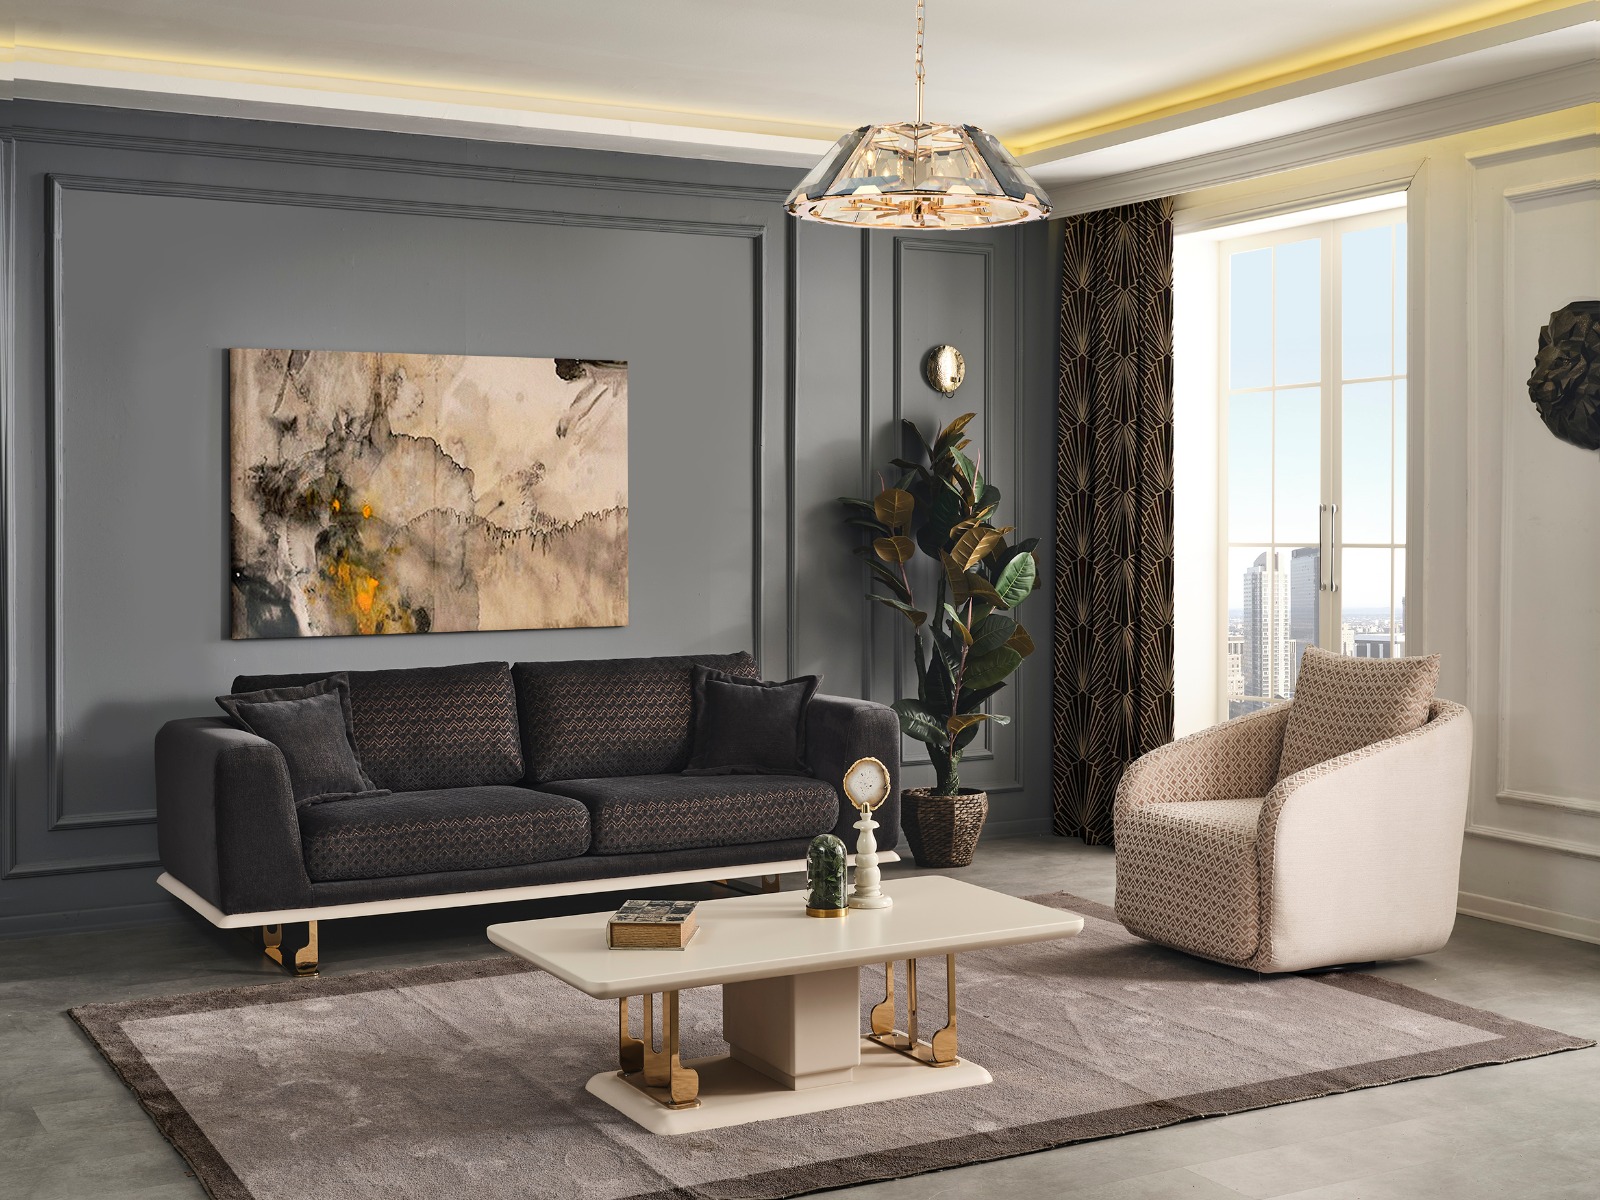 Living room 900k Fill your space with the majestic grace of this set. The classic traits such as a pattern matte fabric and golden legs showcase timeless elegance in your interior. The soft velvet upholstery is a